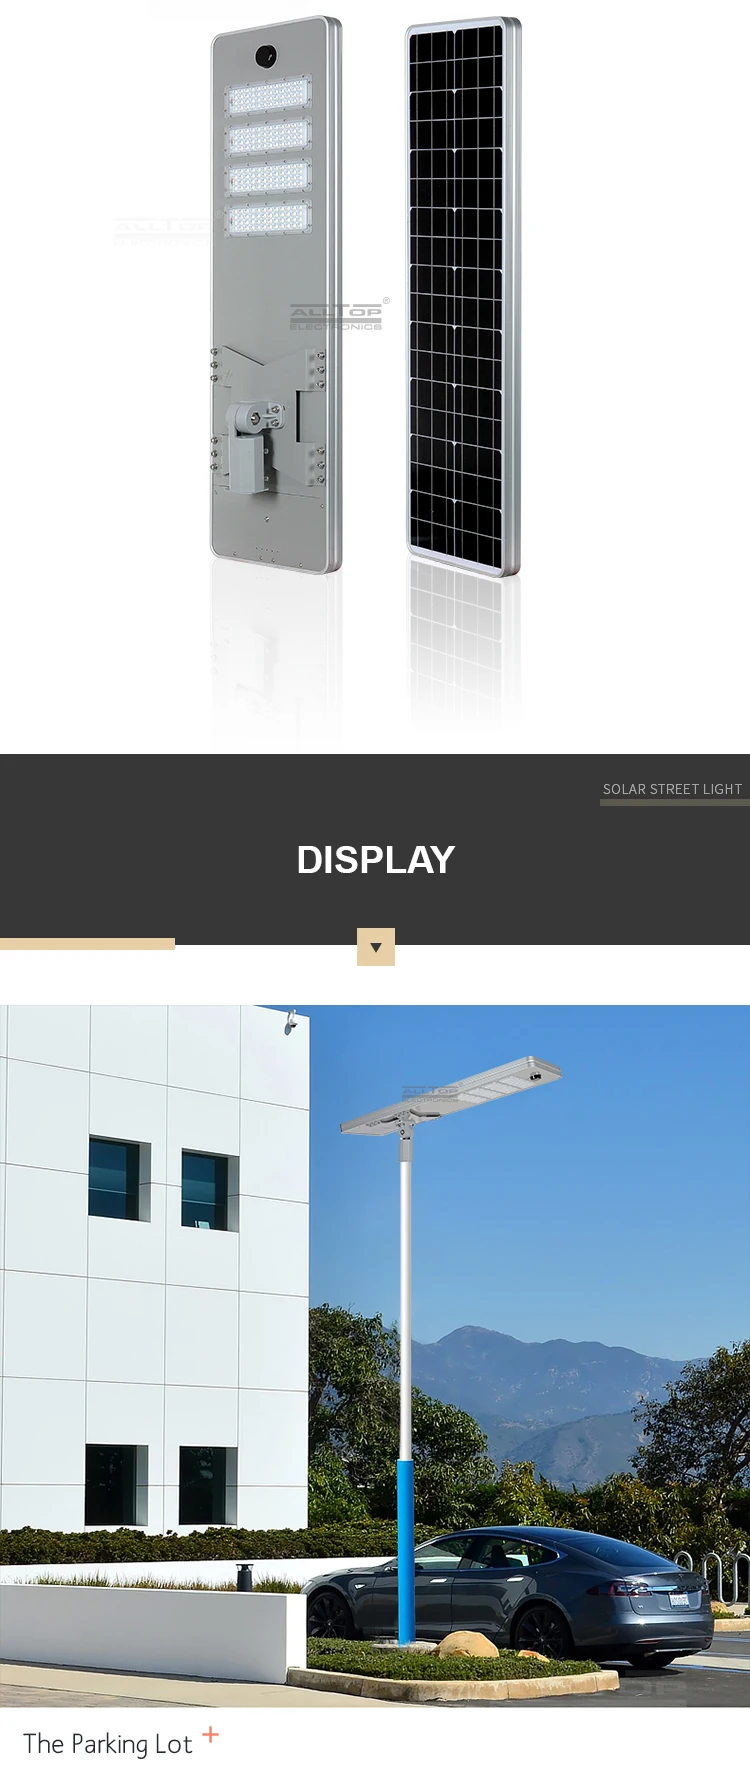 ALLTOP High quality outdoor courtyard lighting ip65 smd 50w 100w 150w 200w integrated all in one led solar street light